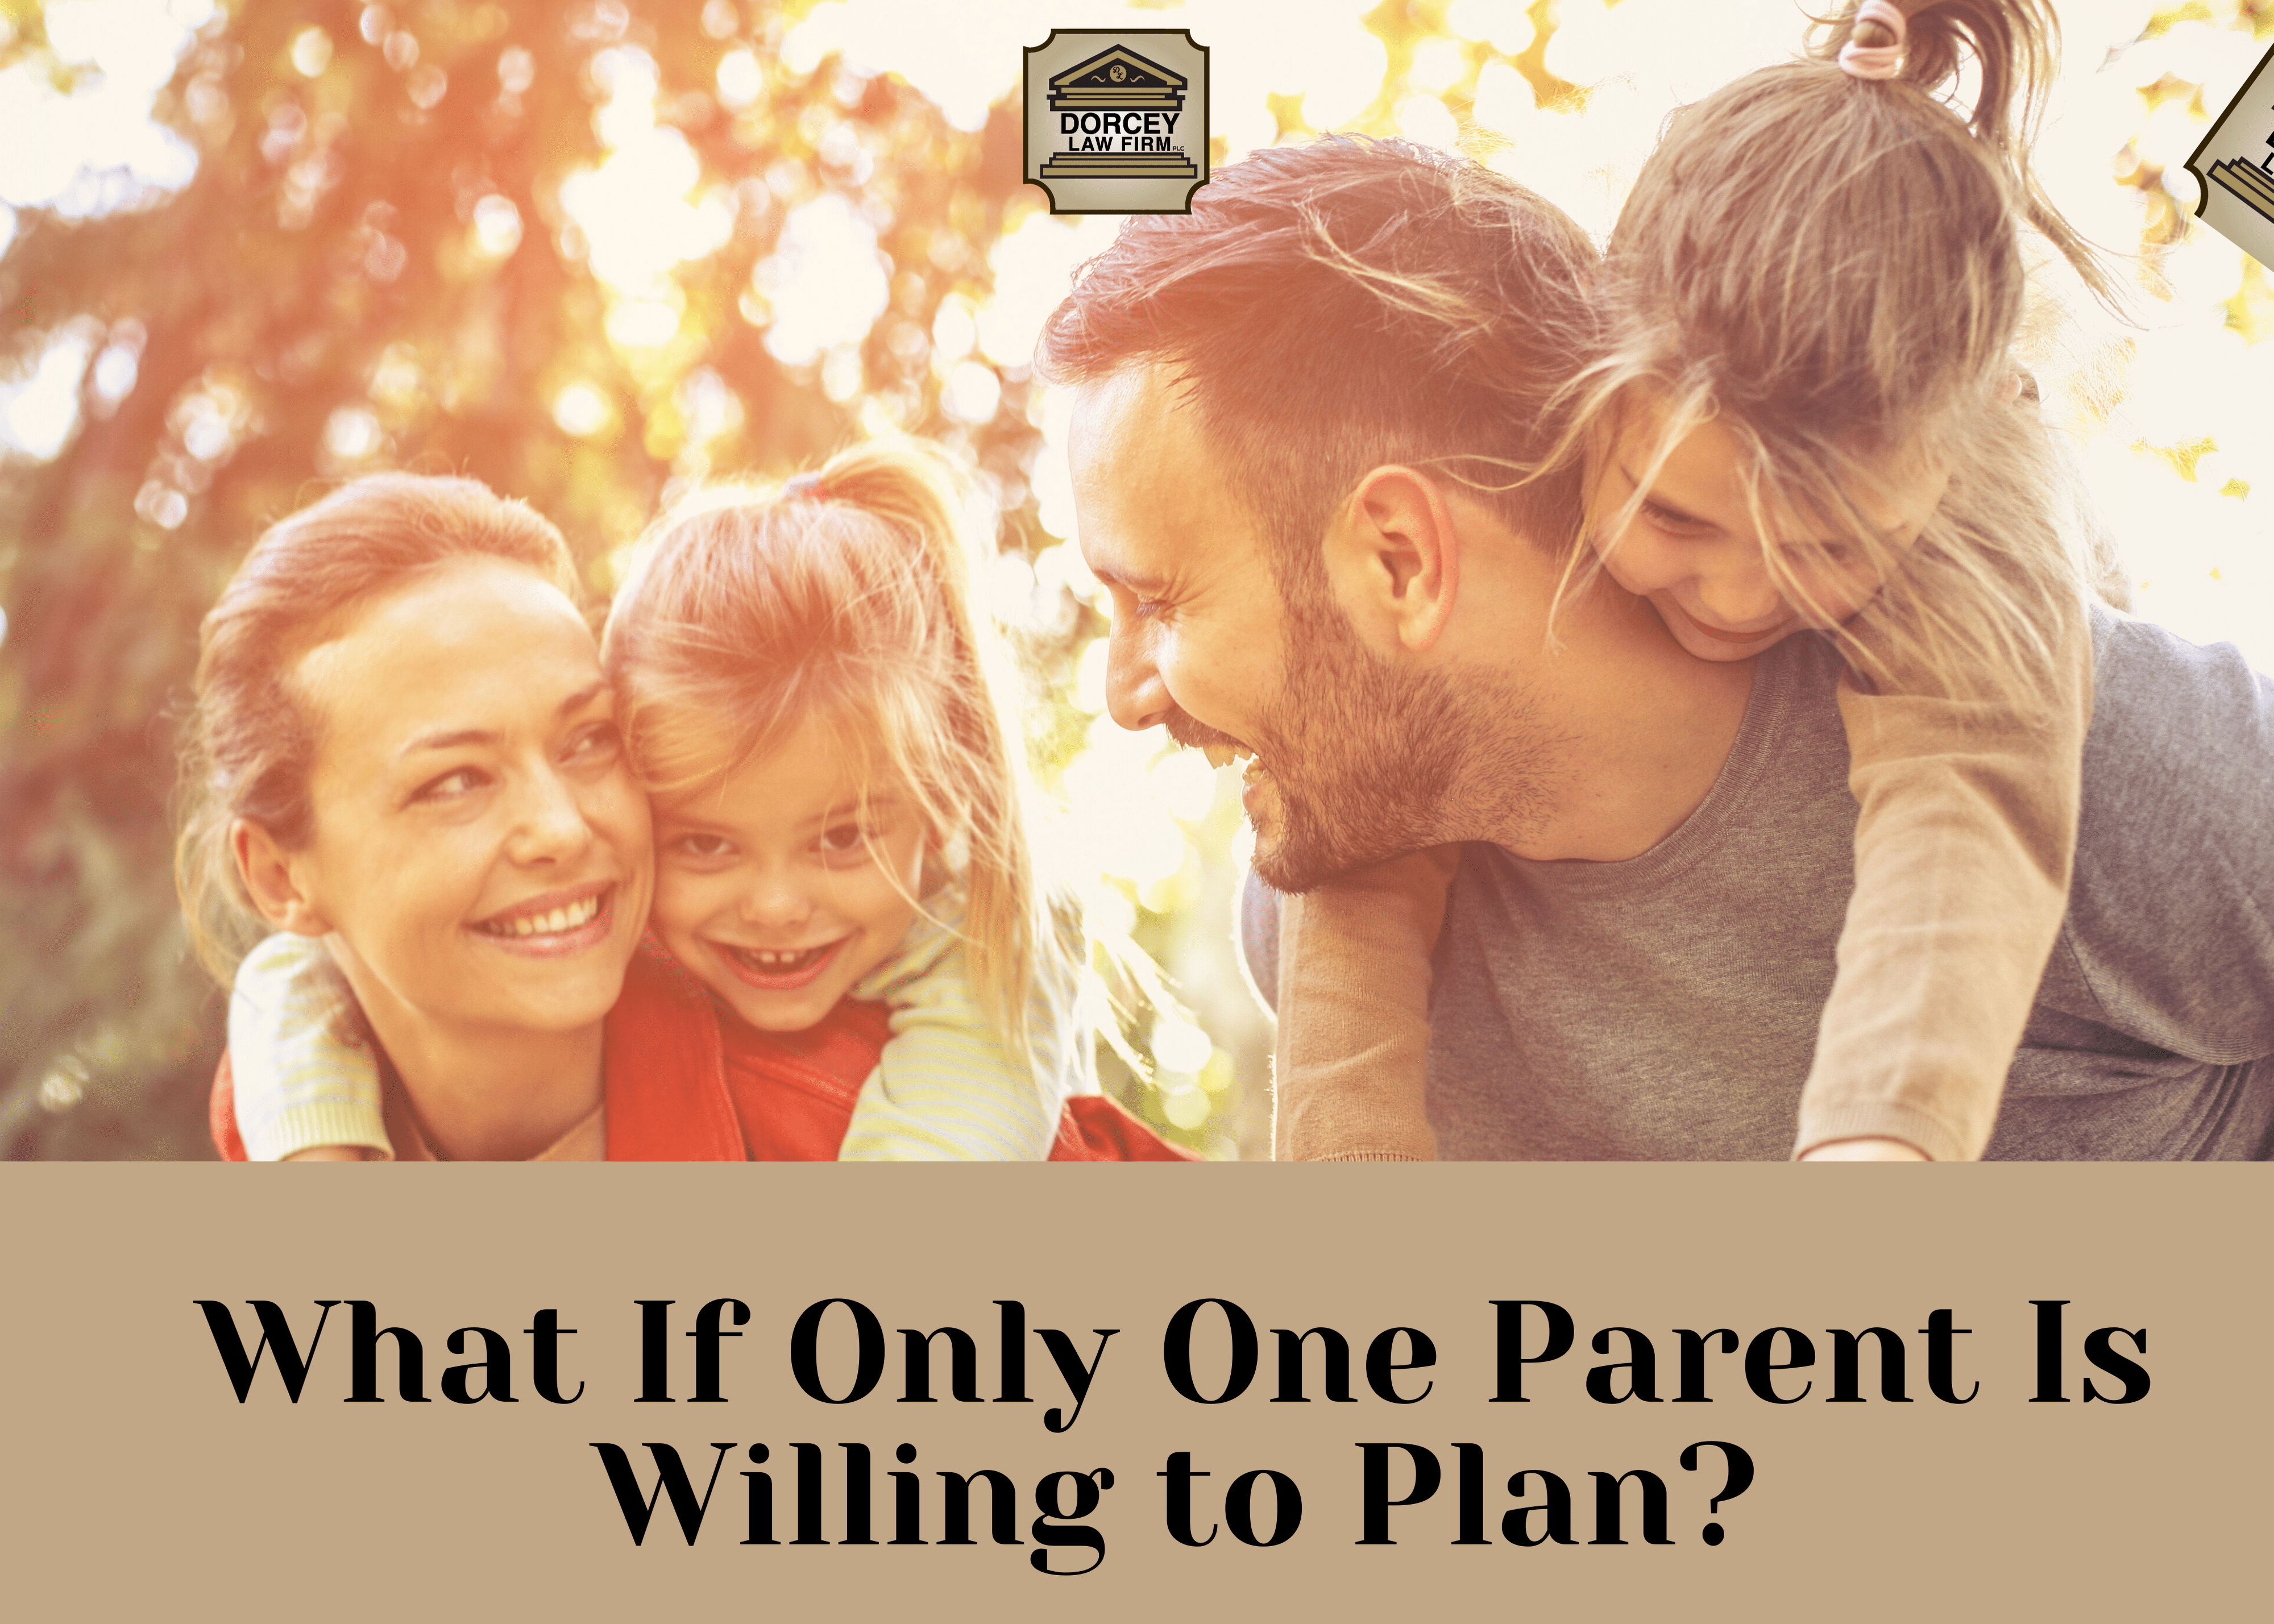 What If Only One Parent Is Willing to Plan?